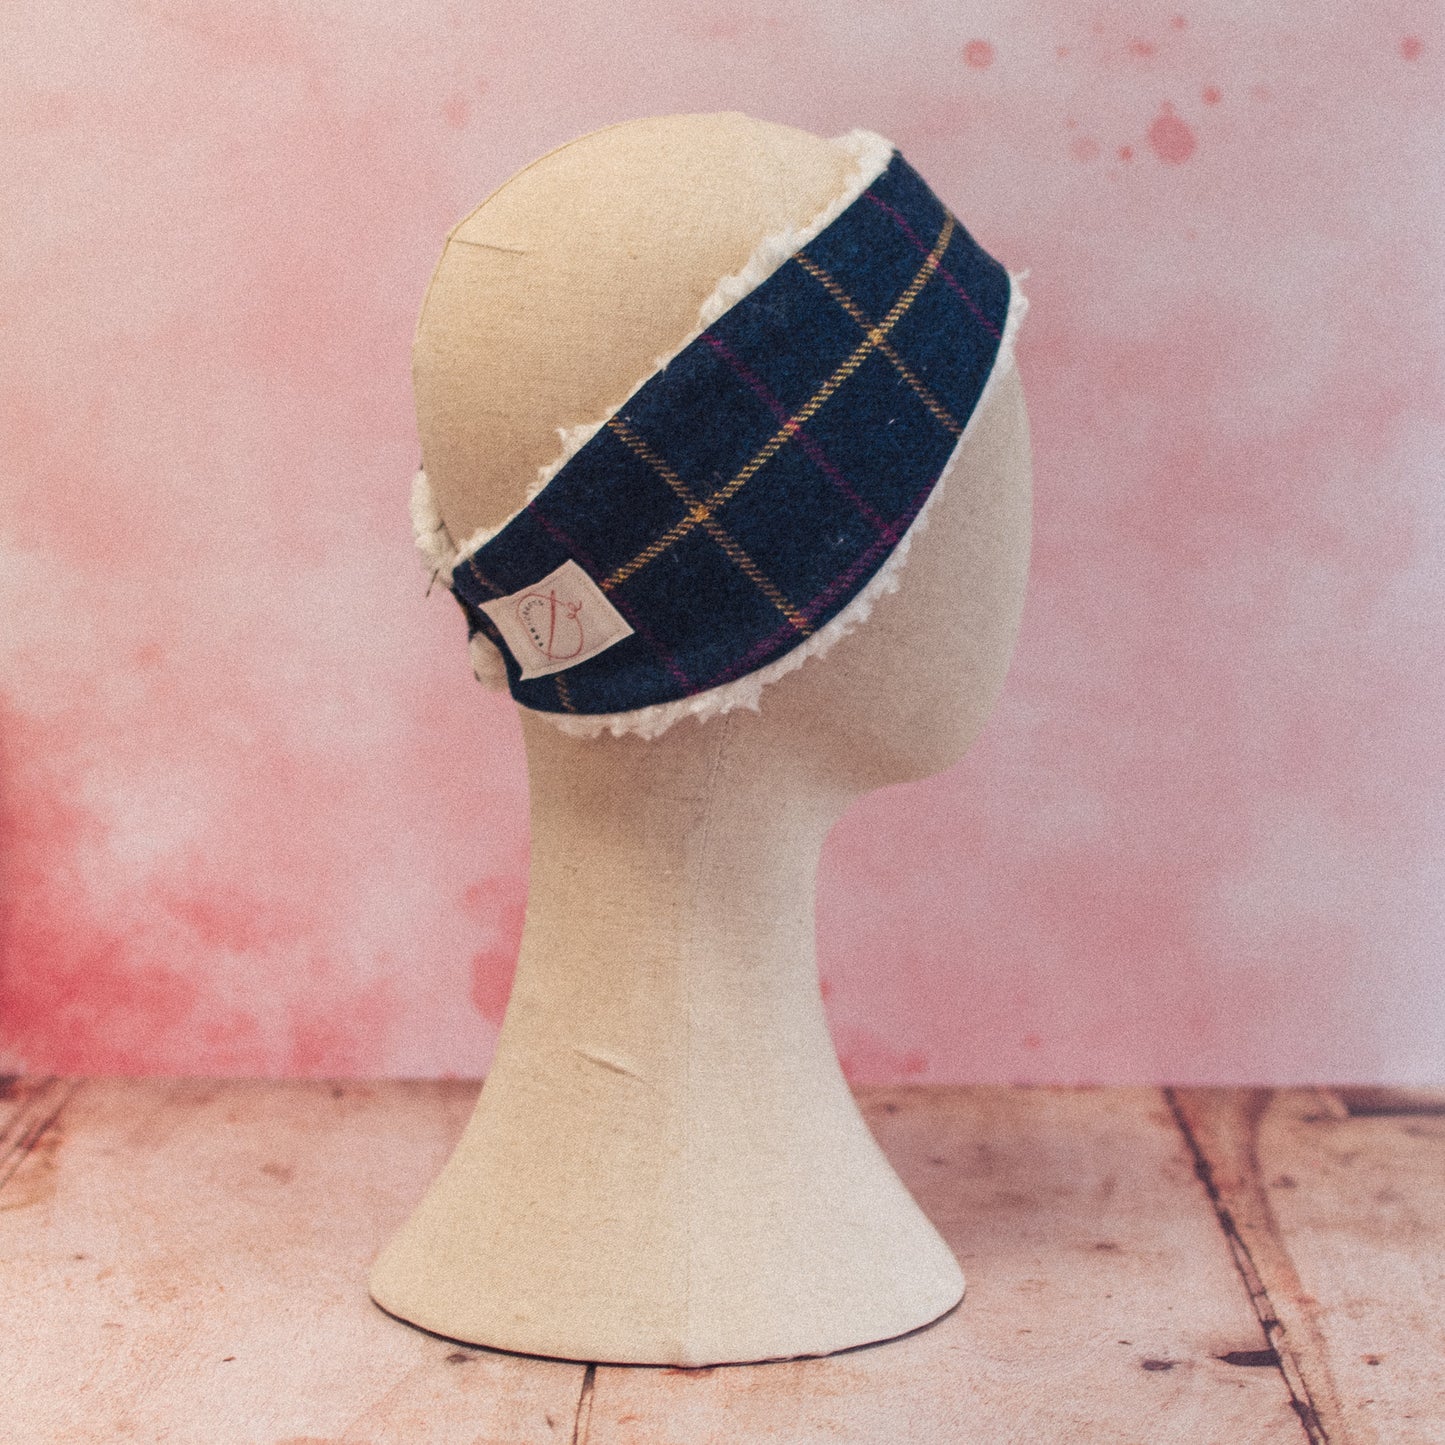 Colliford Tweed earwarmer handmade by F&B Crafts - navy blue with yellow and pink windowpane check